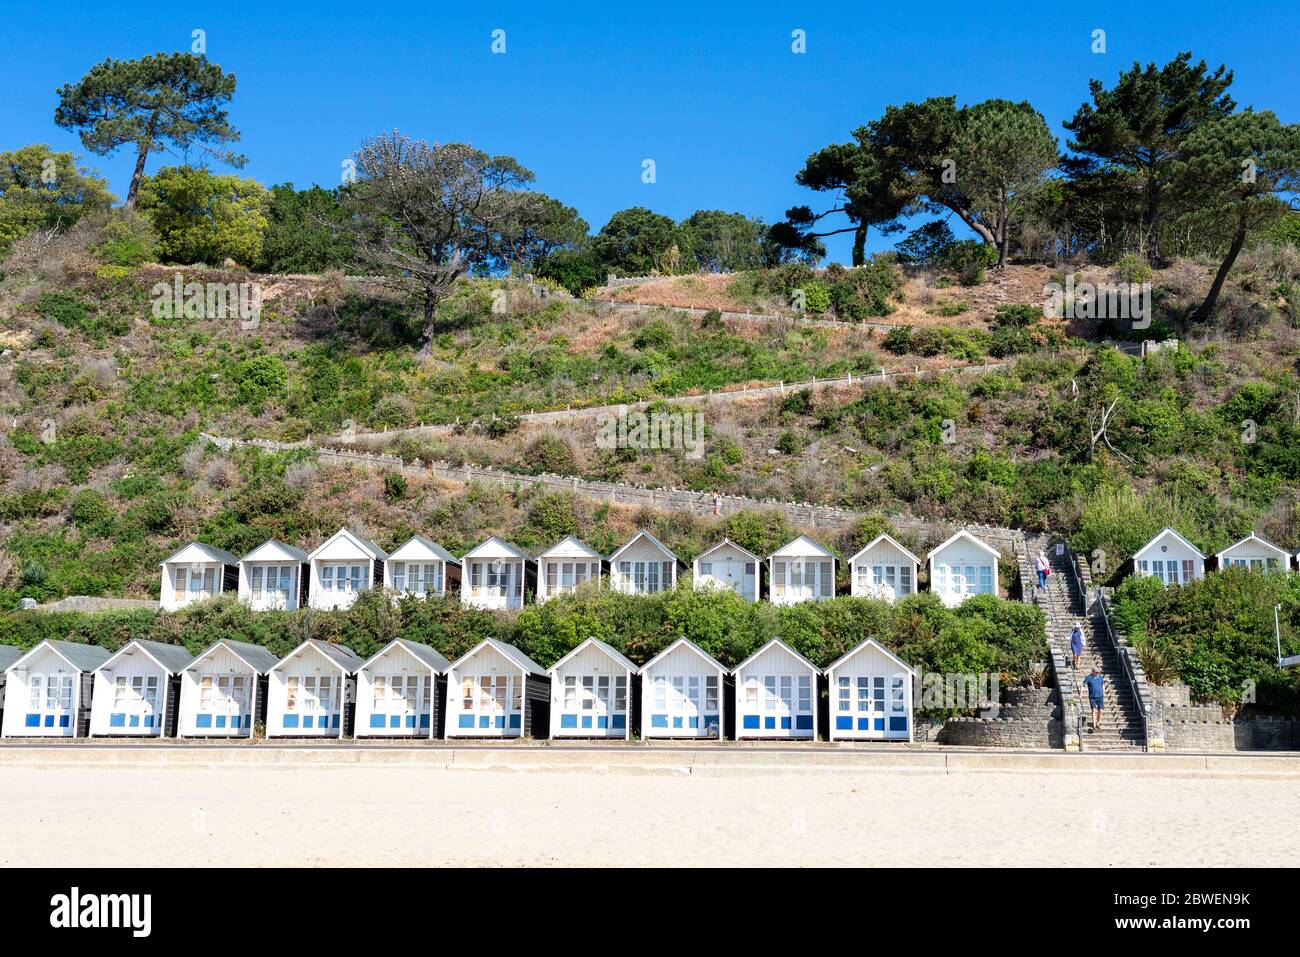 Branksome Chine Beach, Poole, Dorset, UK, 1st June 2020, Weather. More brilliant morning sunshine on the first day of meteorological summer following the sunniest spring on record in the UK. It’s Monday morning and the weekend crowds have gone. White beach huts under the cliffs are accessible via zig zag steps. Credit: Paul Biggins/Alamy Live News Stock Photo